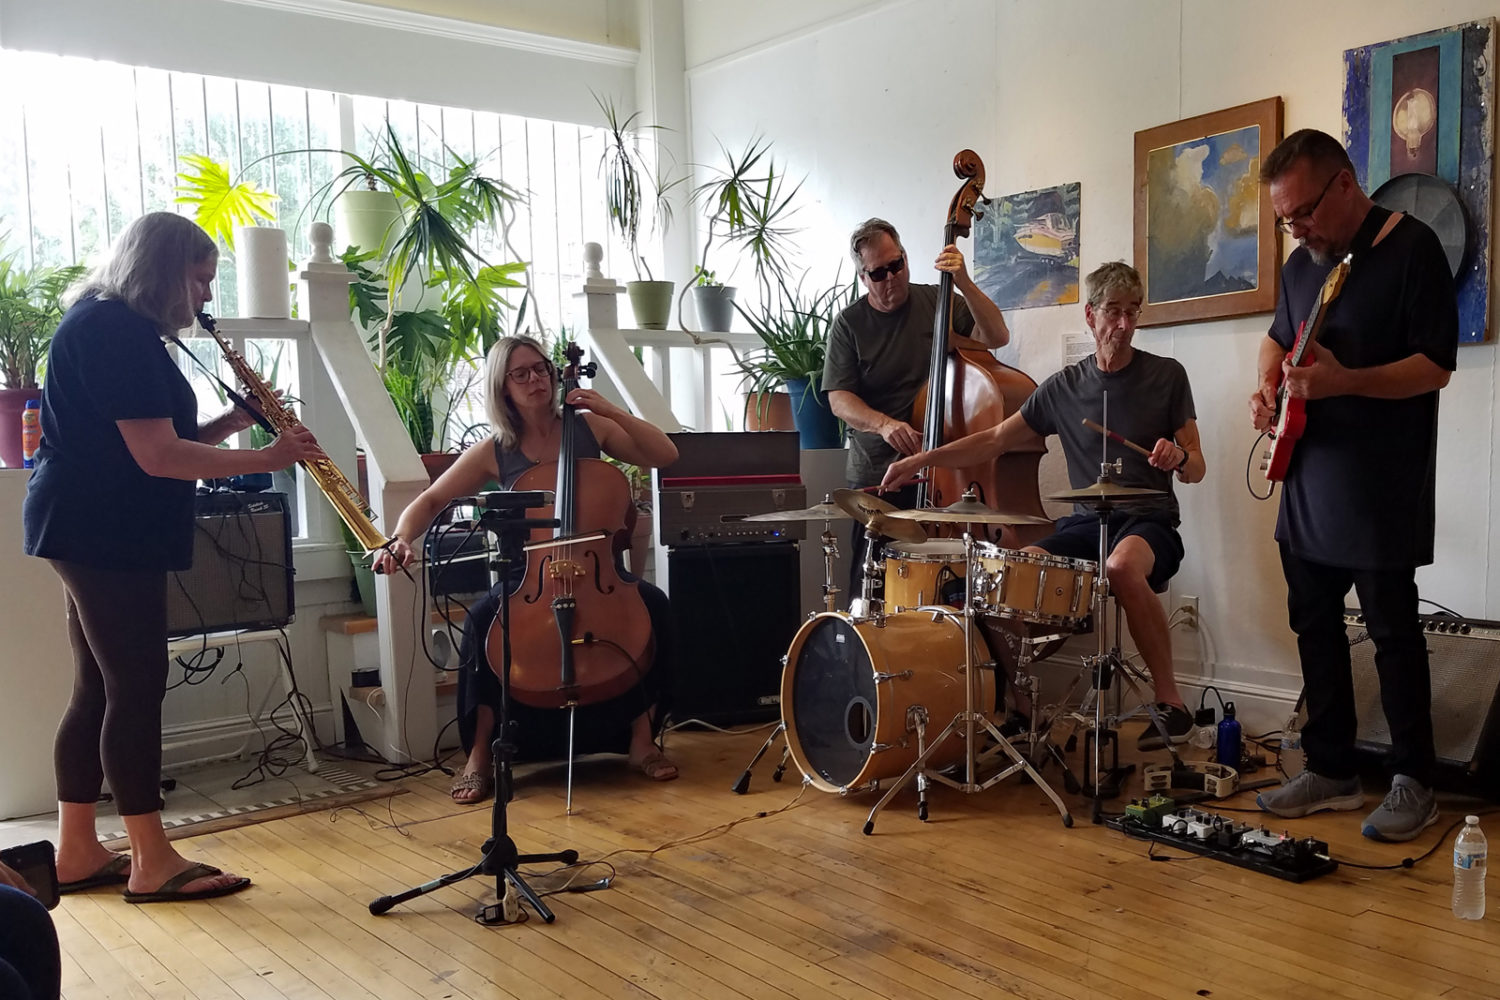 Margaret Explosion performing at Joy Gallery August 2022. Photo by Domnika.